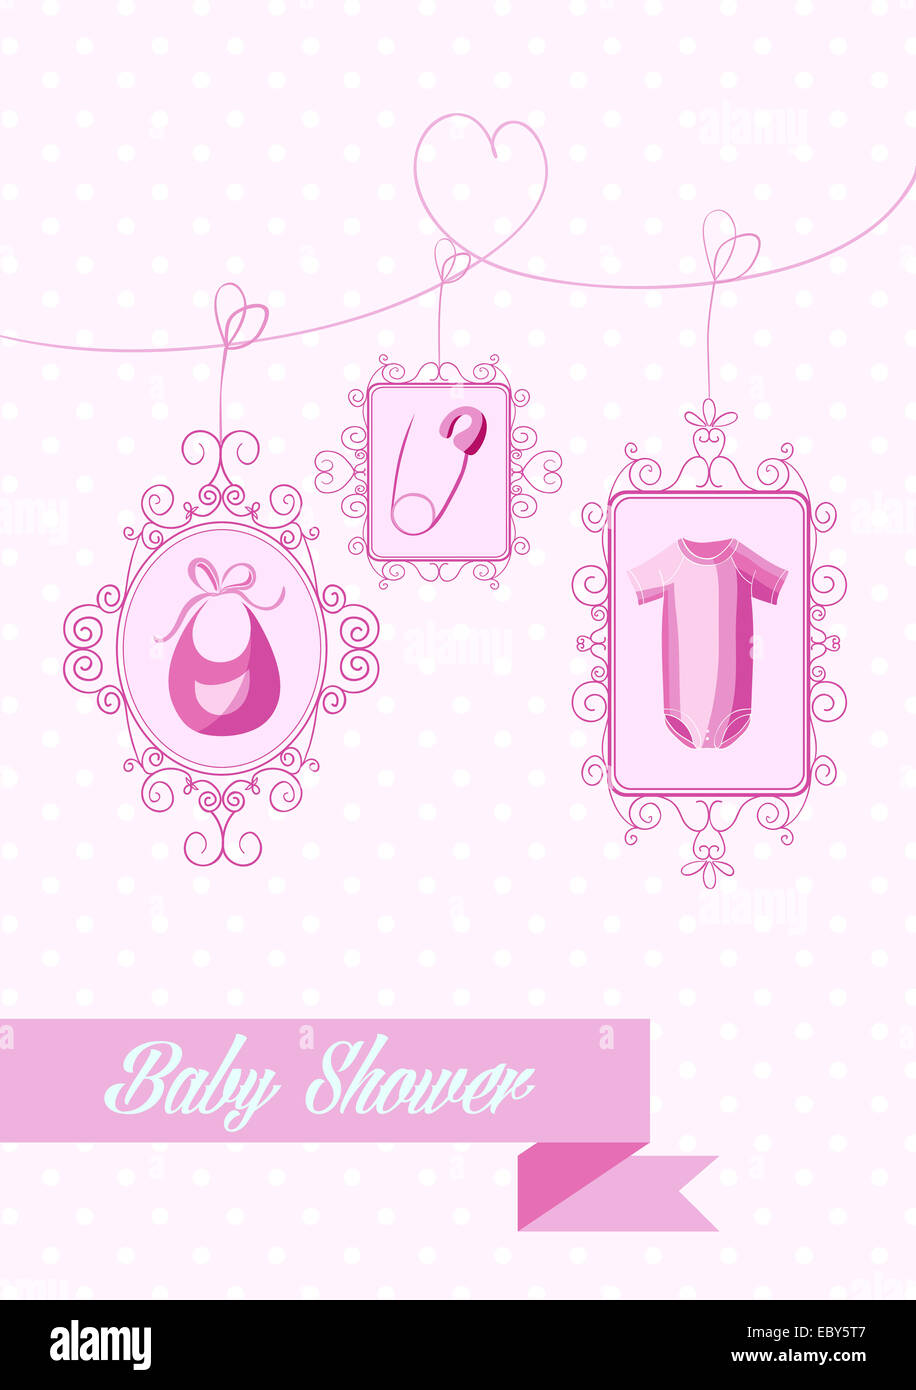 Baby shower girl hanging pink decoration elements. EPS10 vector file organized in layers for easy editing. Stock Photo